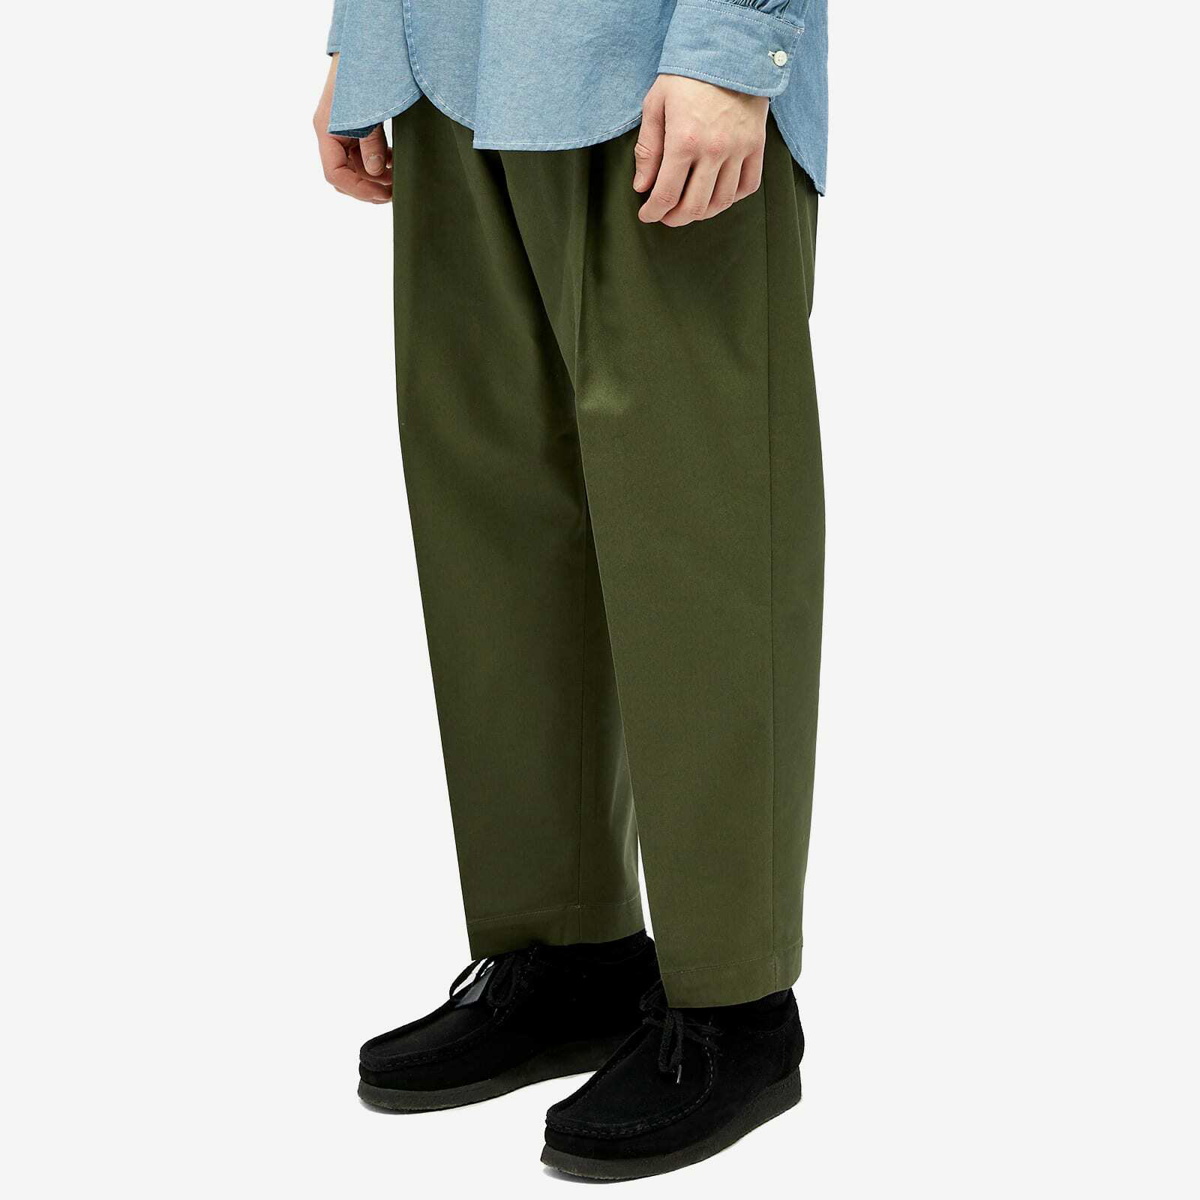 Neighborhood Men's Two Tuck Trousers in Olive Drab